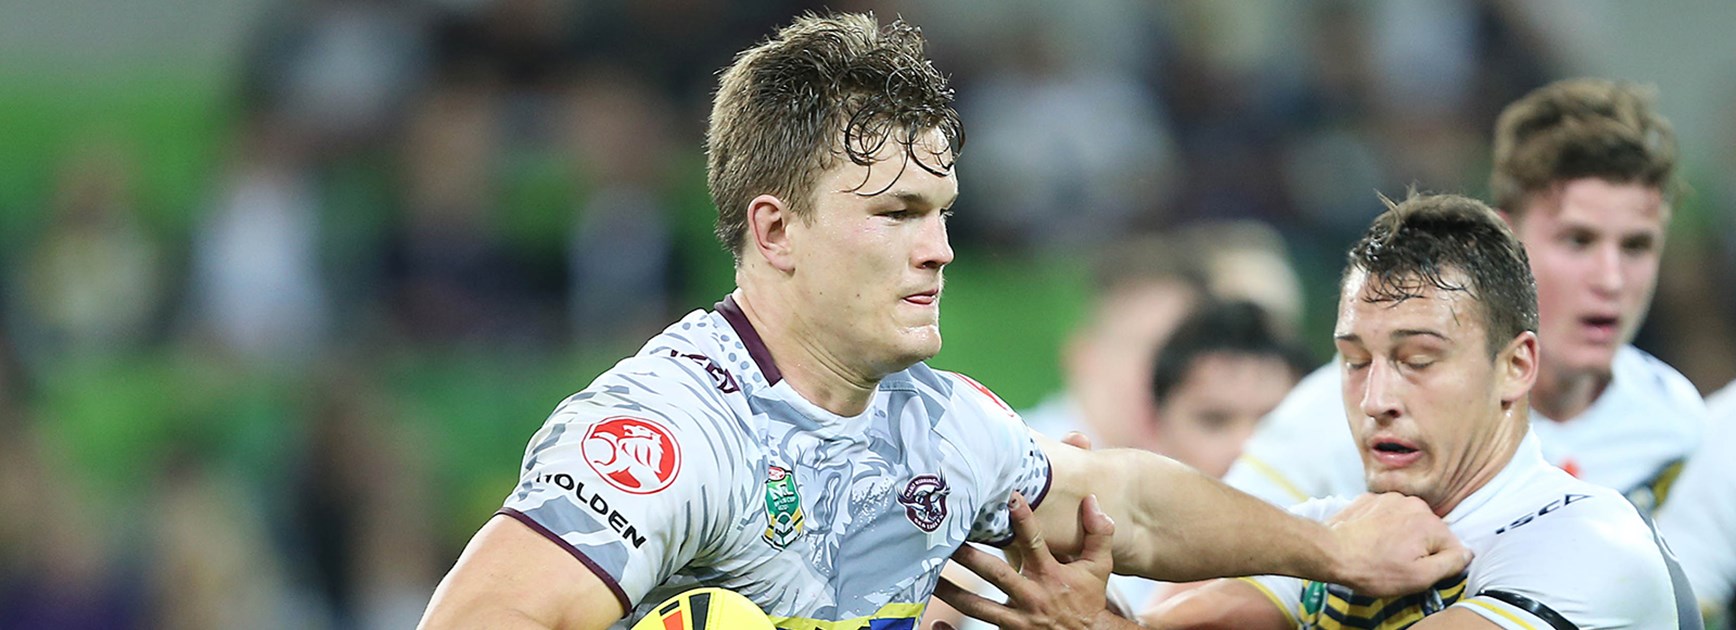 Rookie Liam Knight is set to make his NRL debut for the Sea Eagles in Round 15 of the Telstra Premiership.